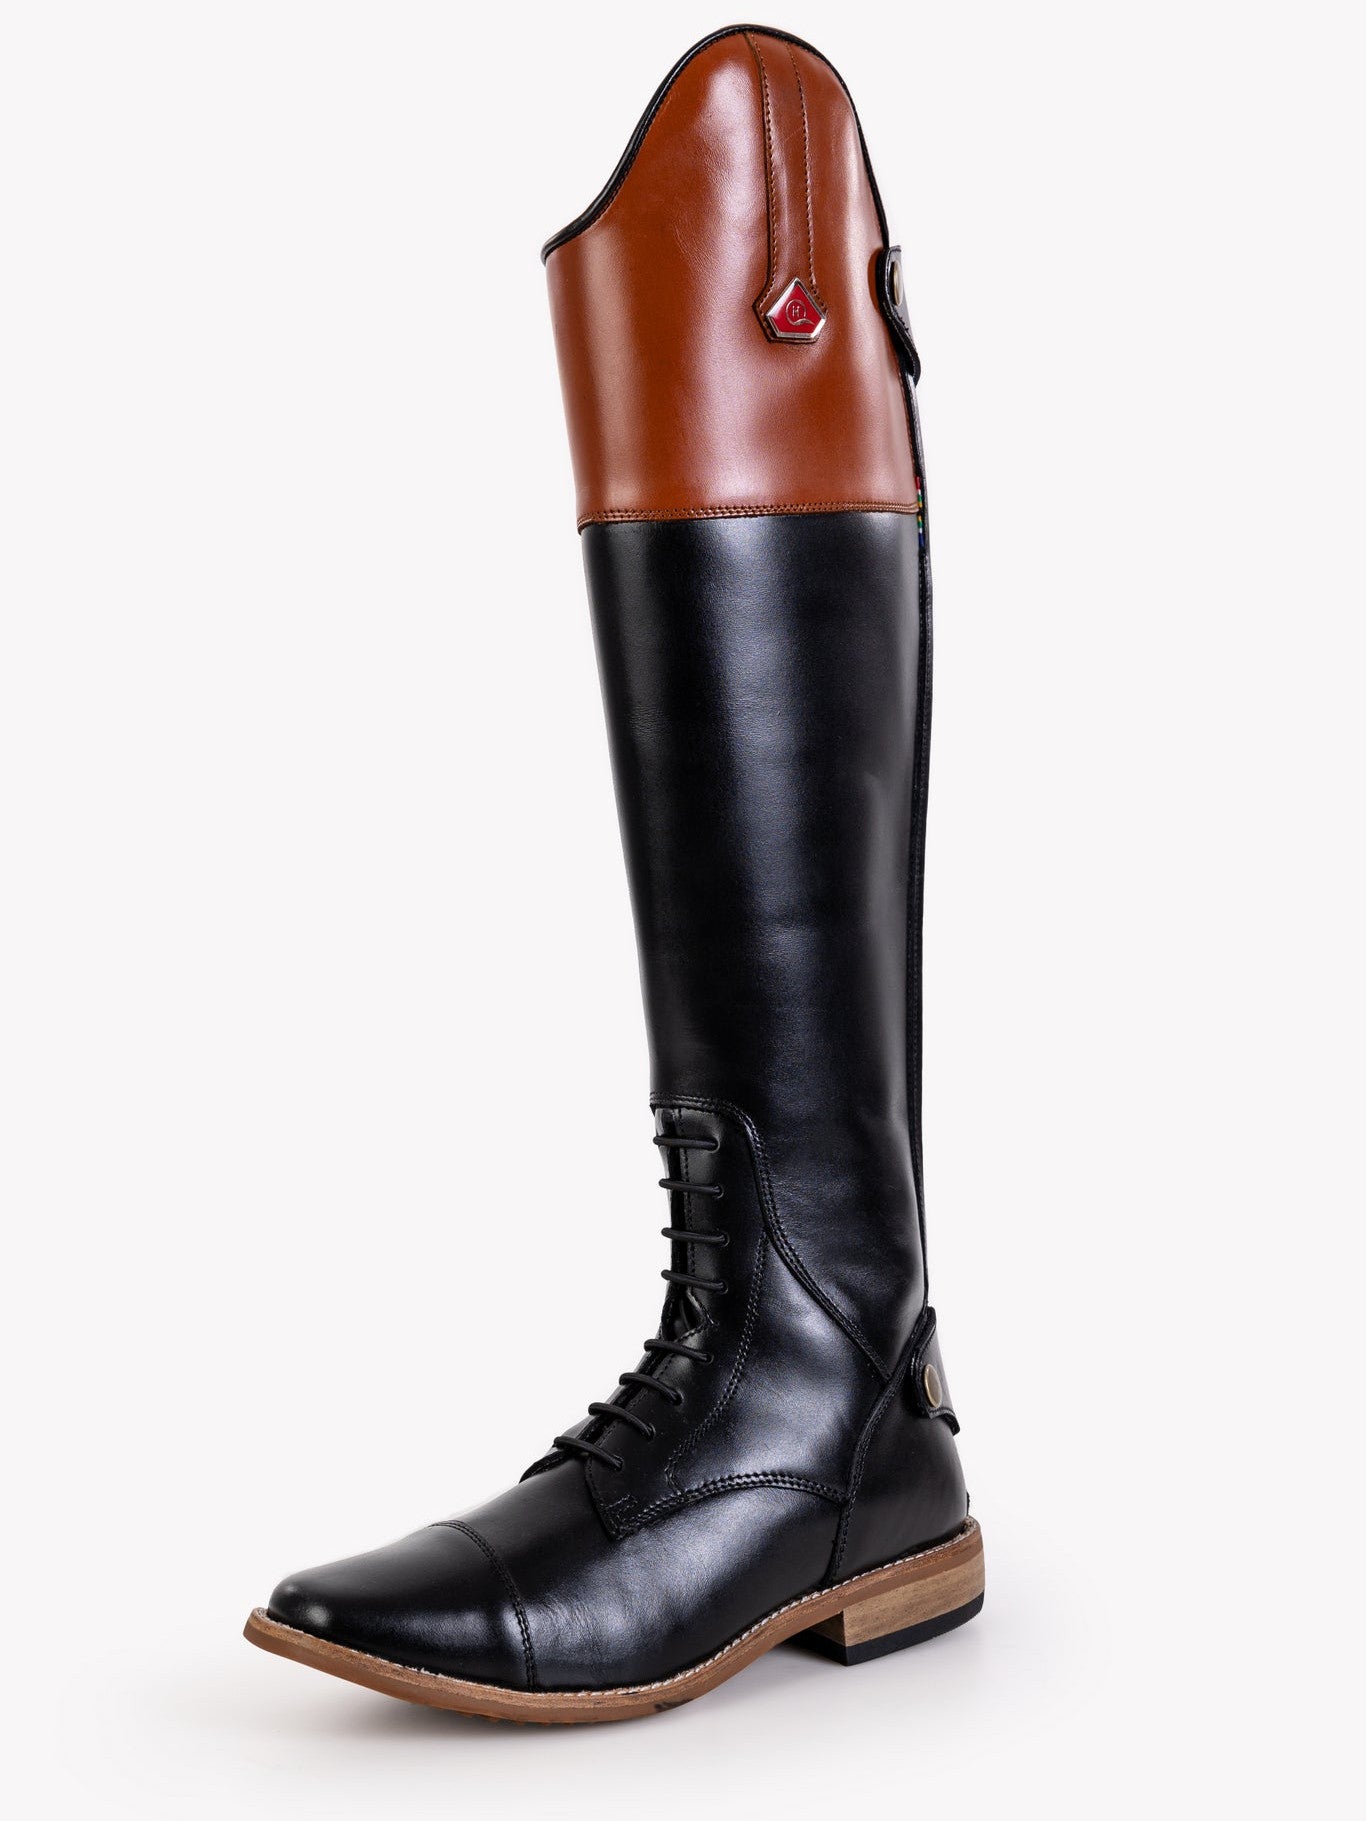 Long Boots For Horse Riding | Hello Quality Equestrian